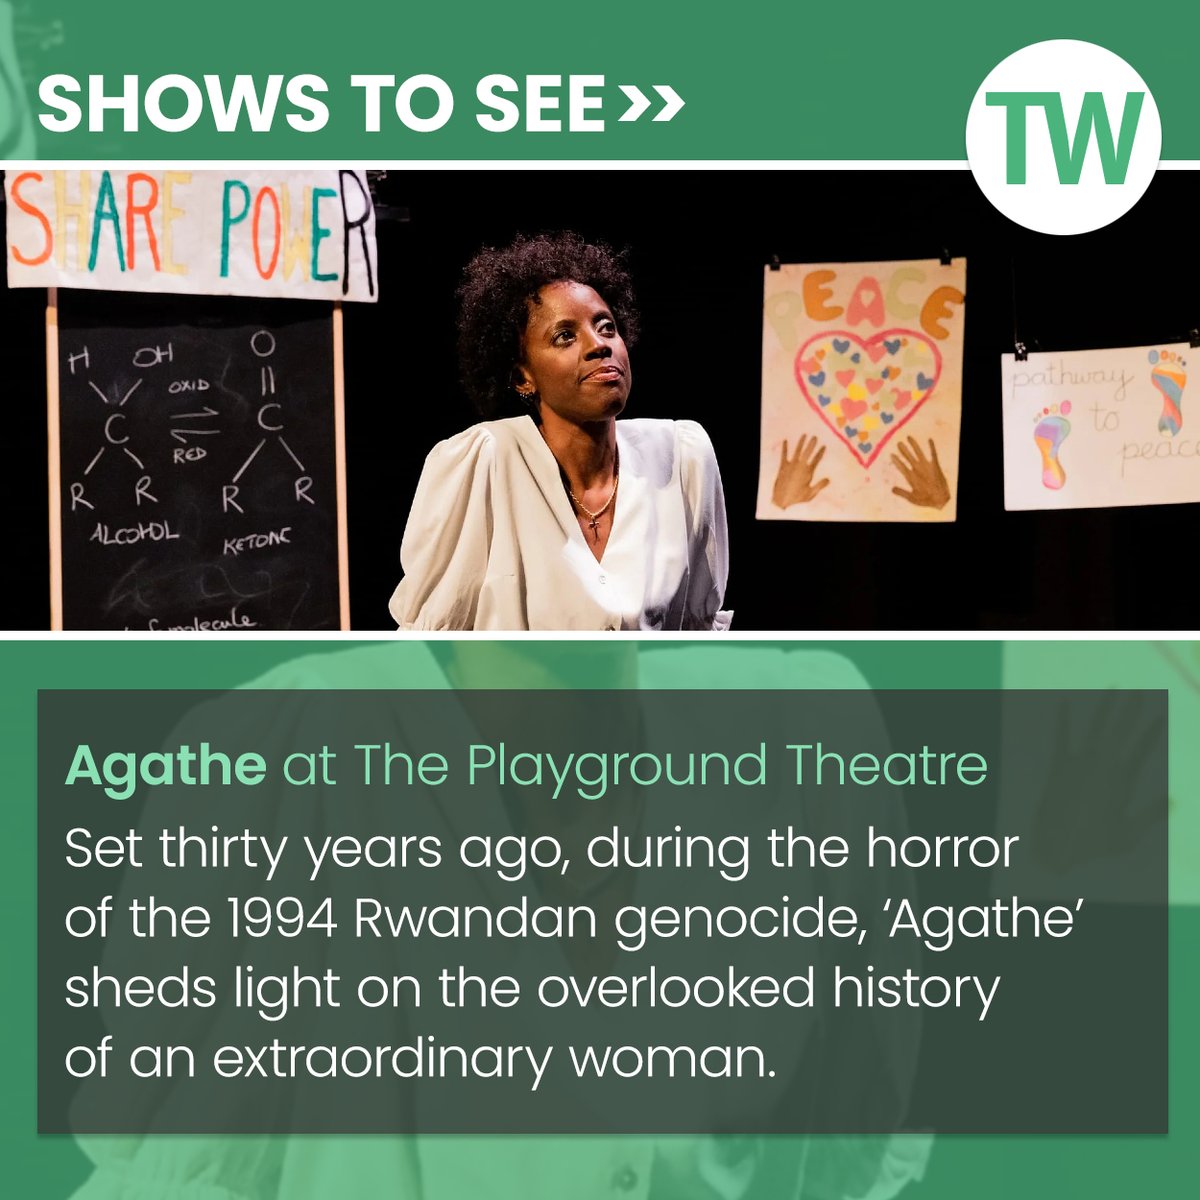 Among our recommended shows to see this week: ‘Agathe’ at The Playground Theatre. Get more show tips here: bit.ly/442CiZE @playgroundW10 @SohayaV